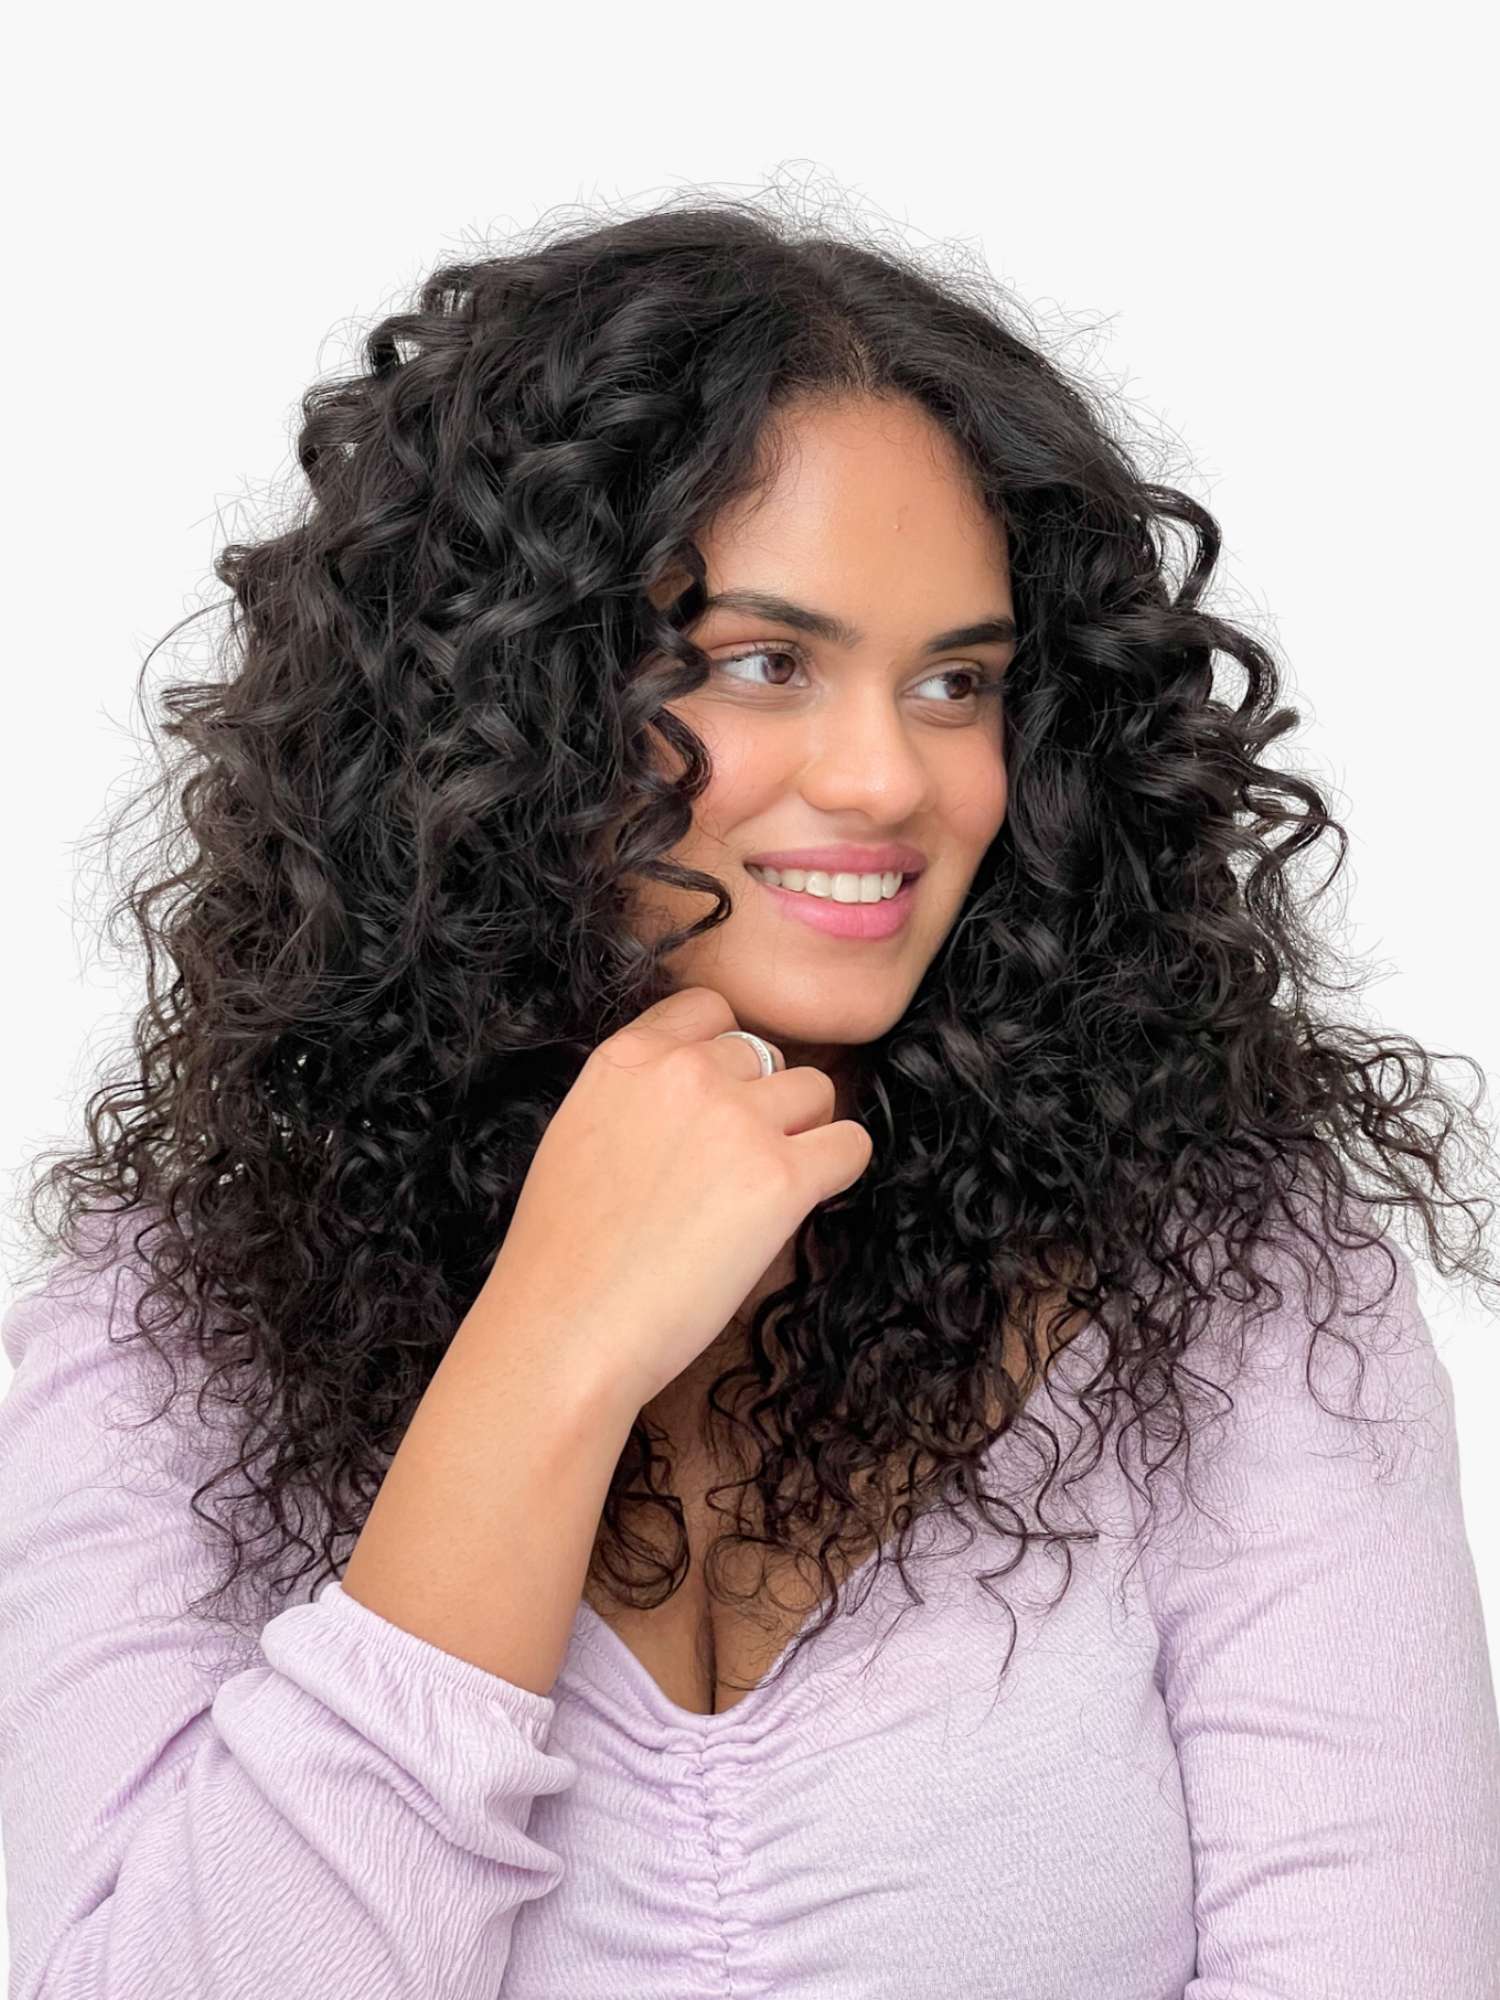 Everything You Need to Know Before Getting ClipIn Natural Hair Extensions